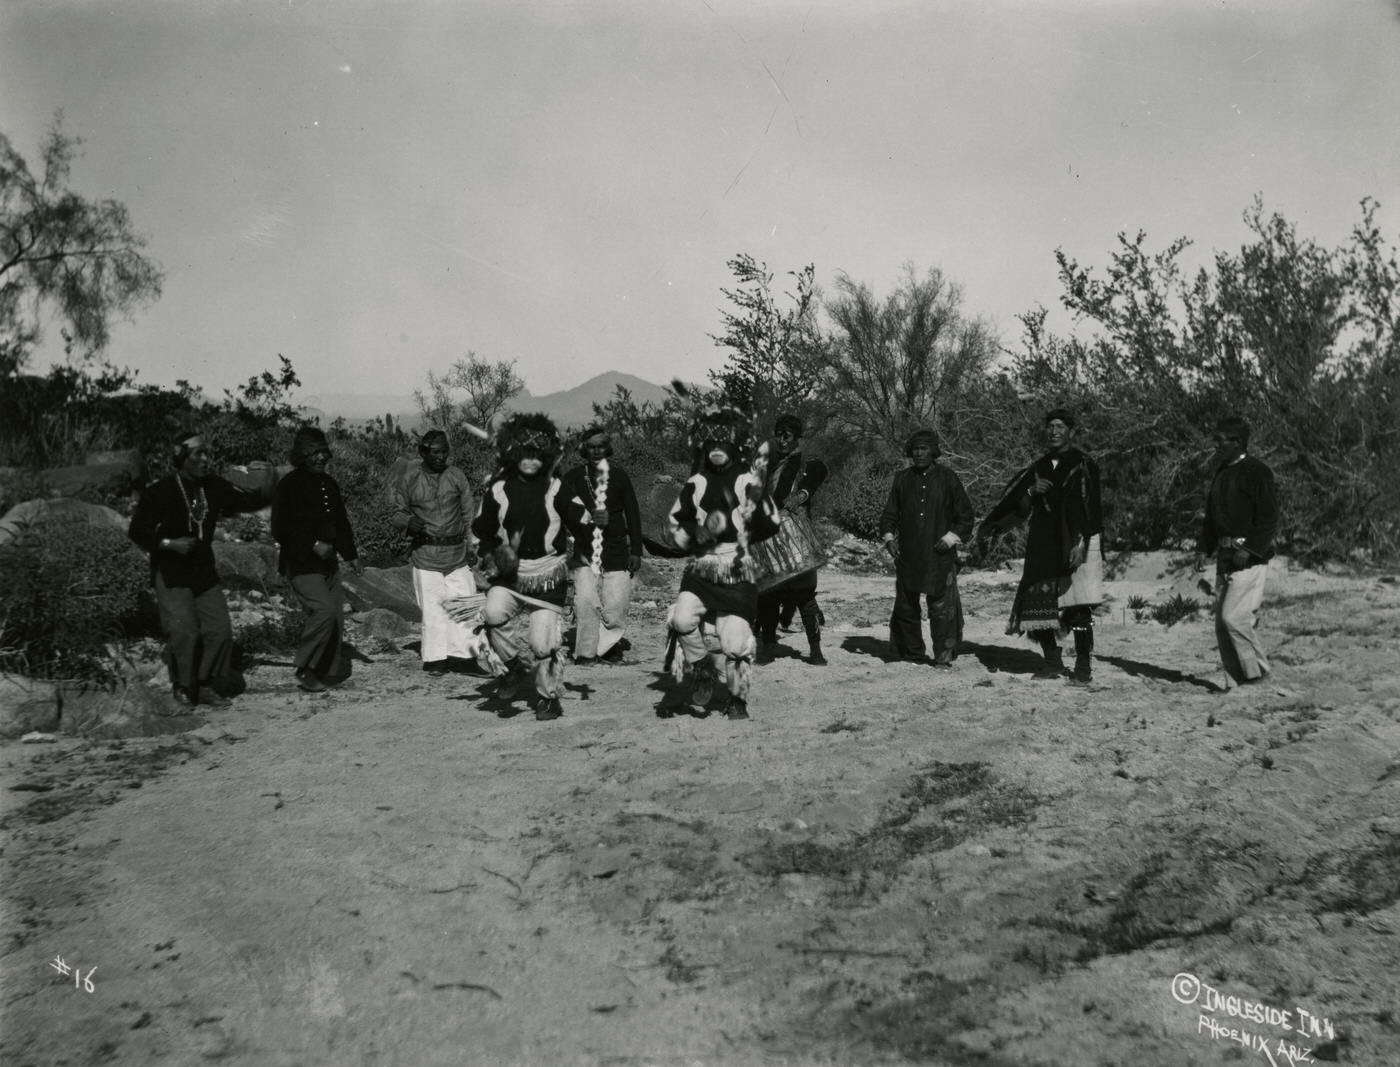 Hopi at Present Site of Pueblo Grande Museum, 1930s. The McCulloch register identifies this image as "Study #16." The date assigned to this photograph is approximate.